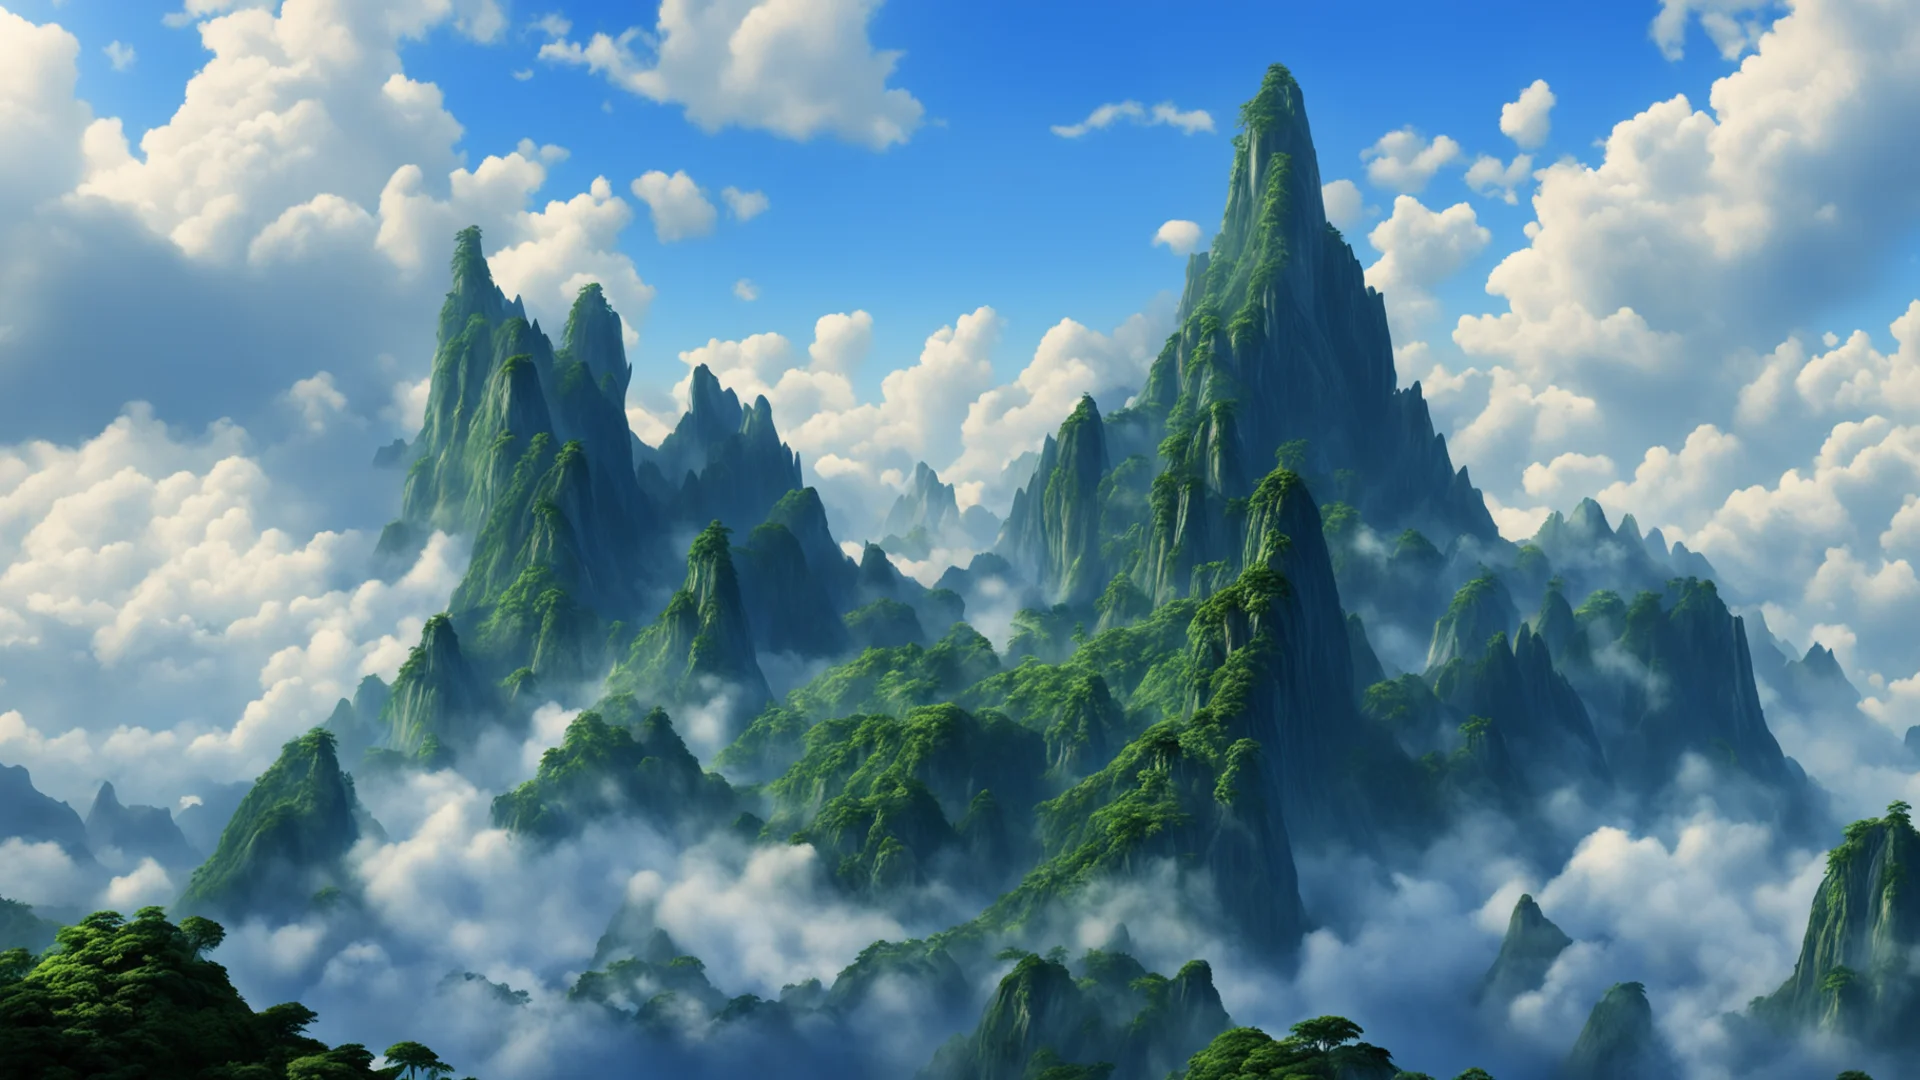 flying mountains from the movie avatar. superrealism wide